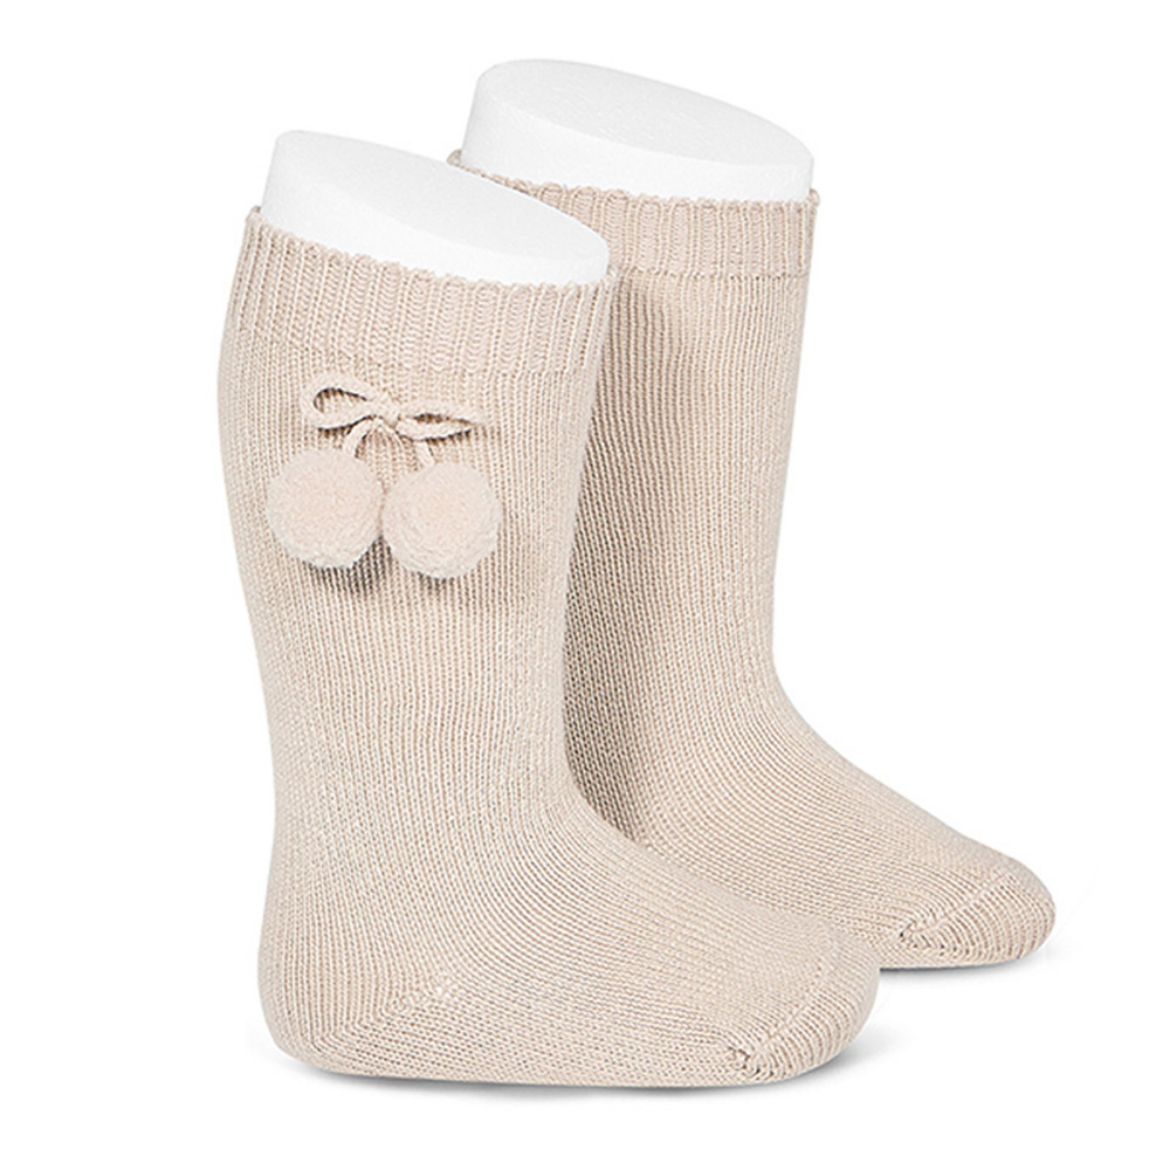 Picture of Condor Knee High Socks with PomPoms - Linen